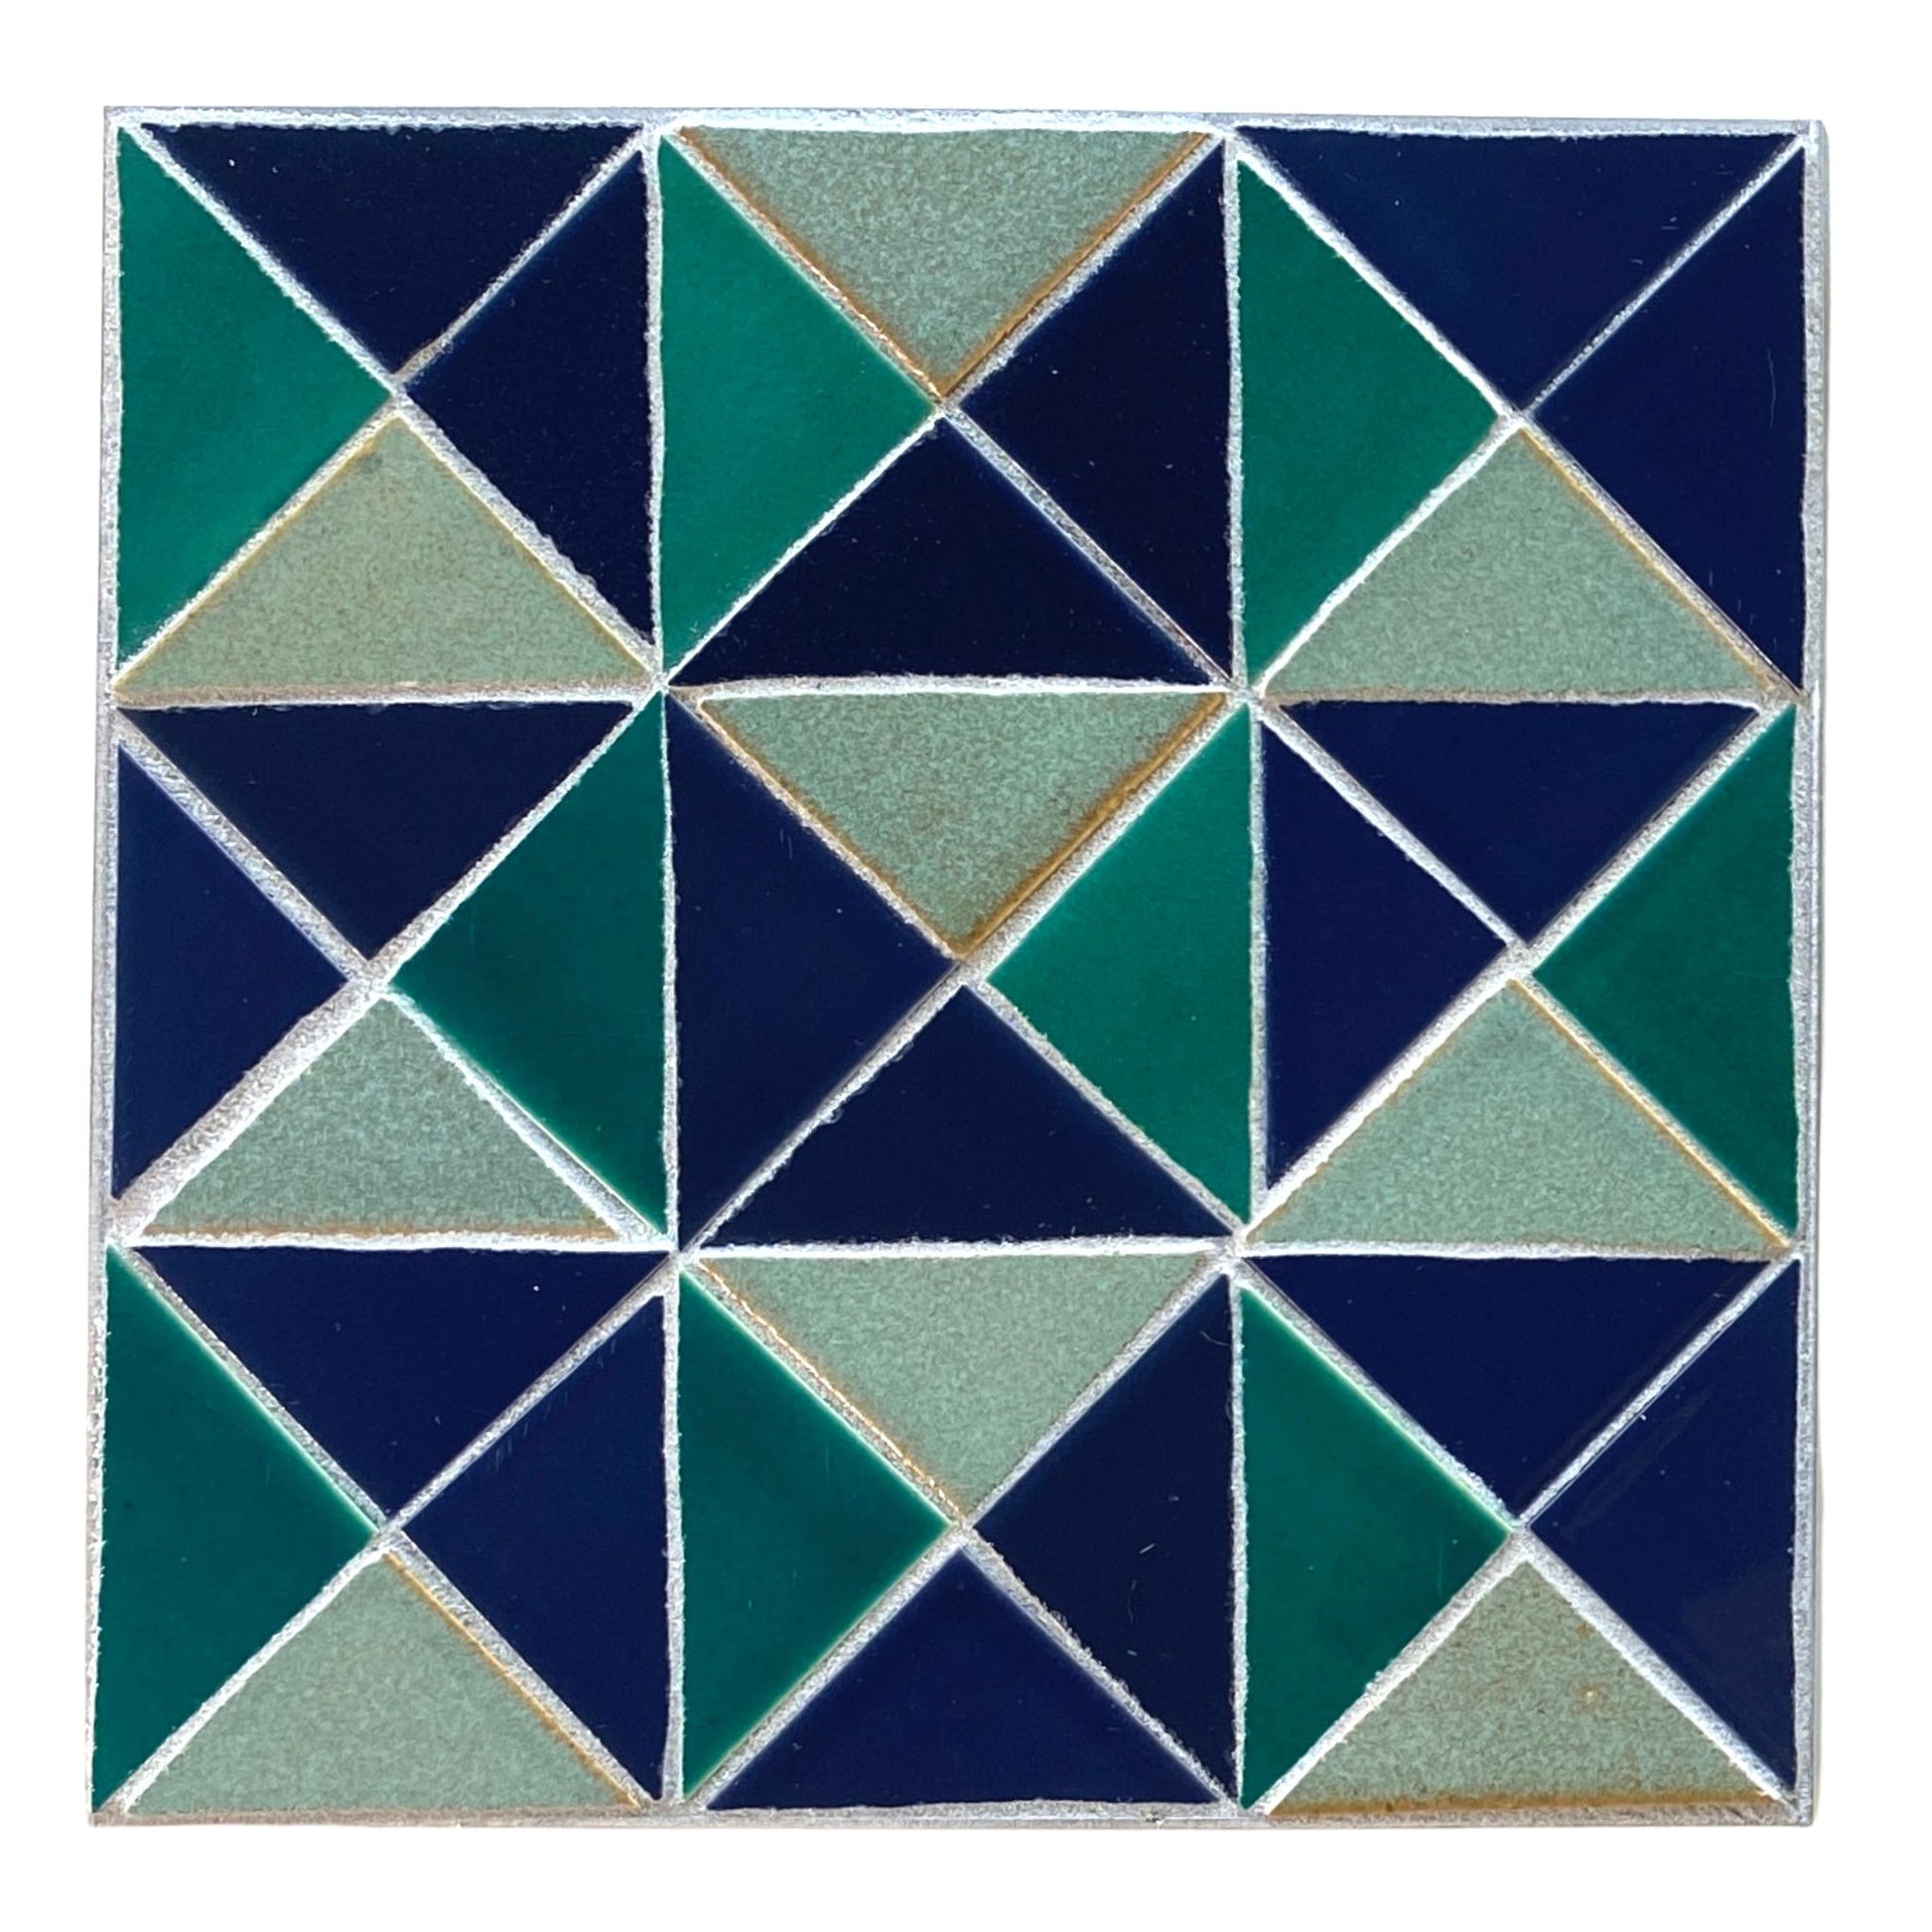 Quilt Mosaic Kit in Heritage Mint grouted